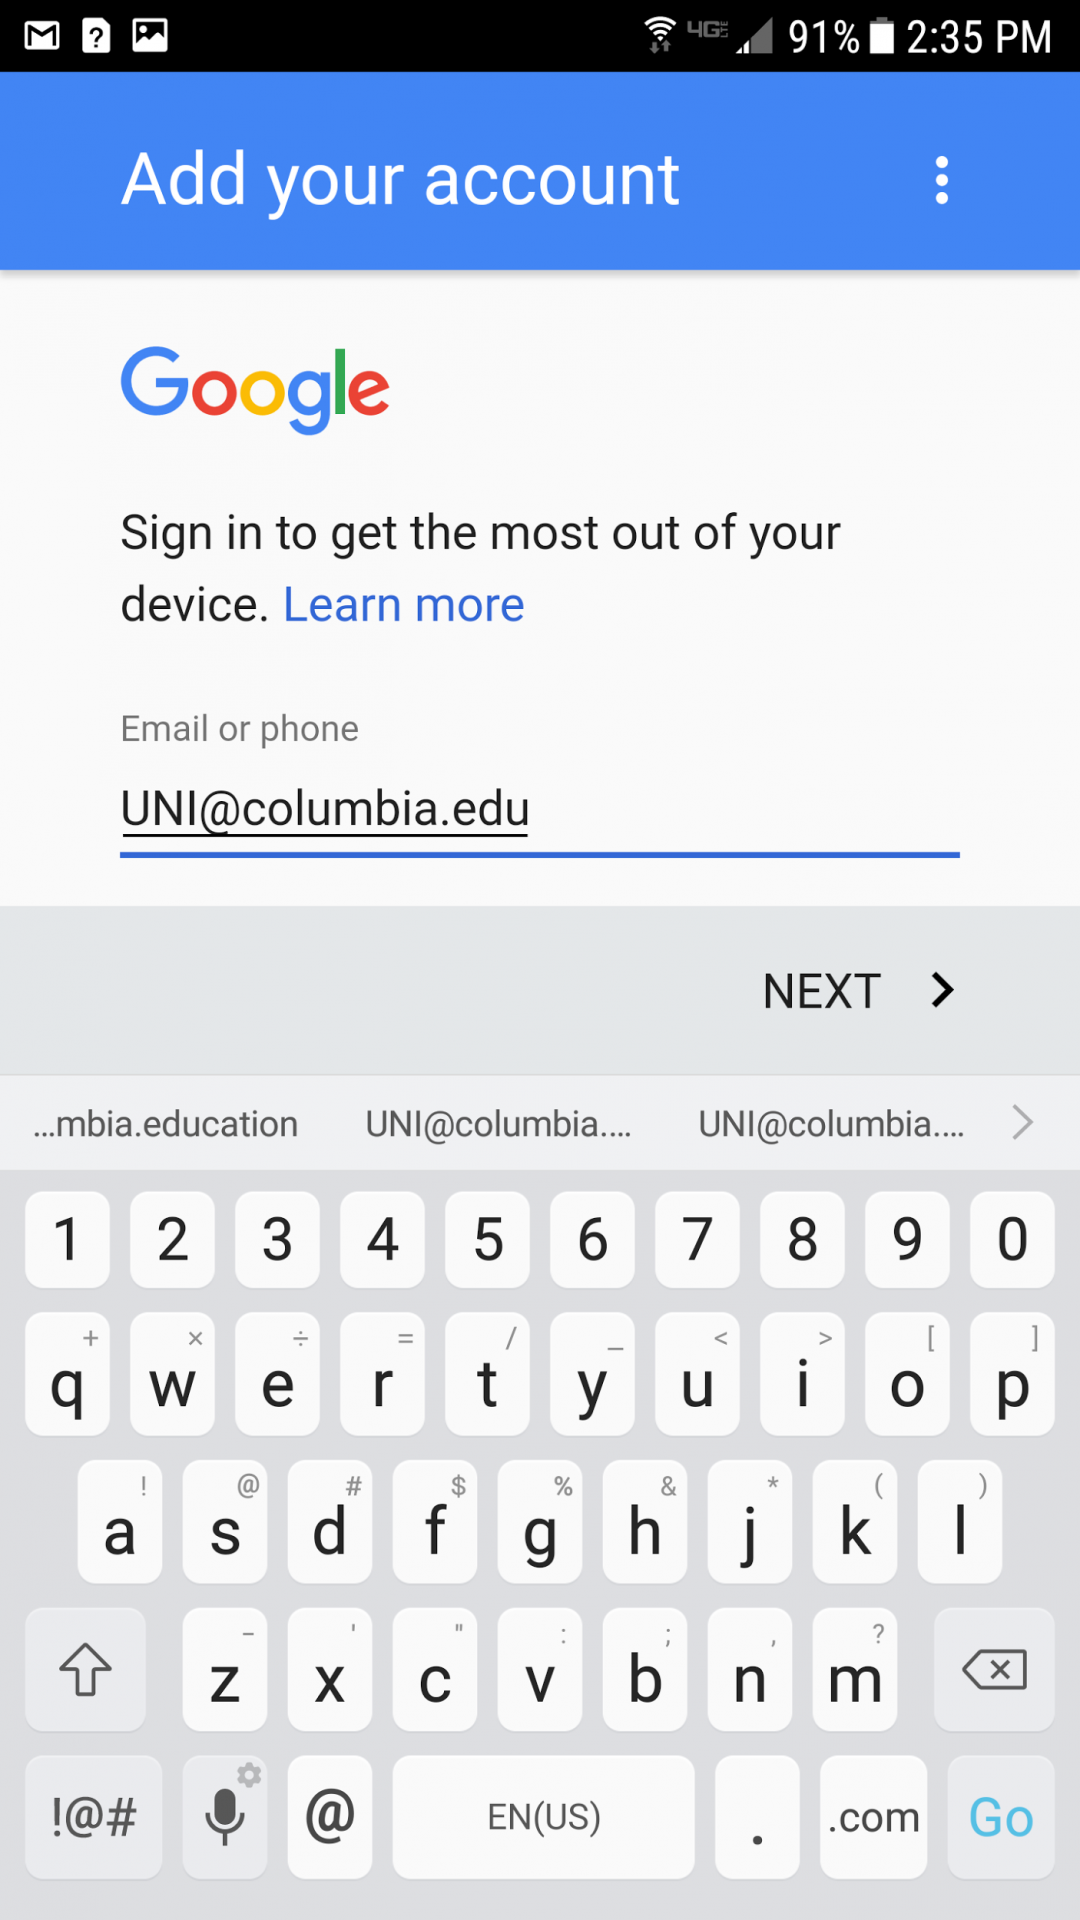 Add your account screen with UNI@columbia.edu entered for Email or phone